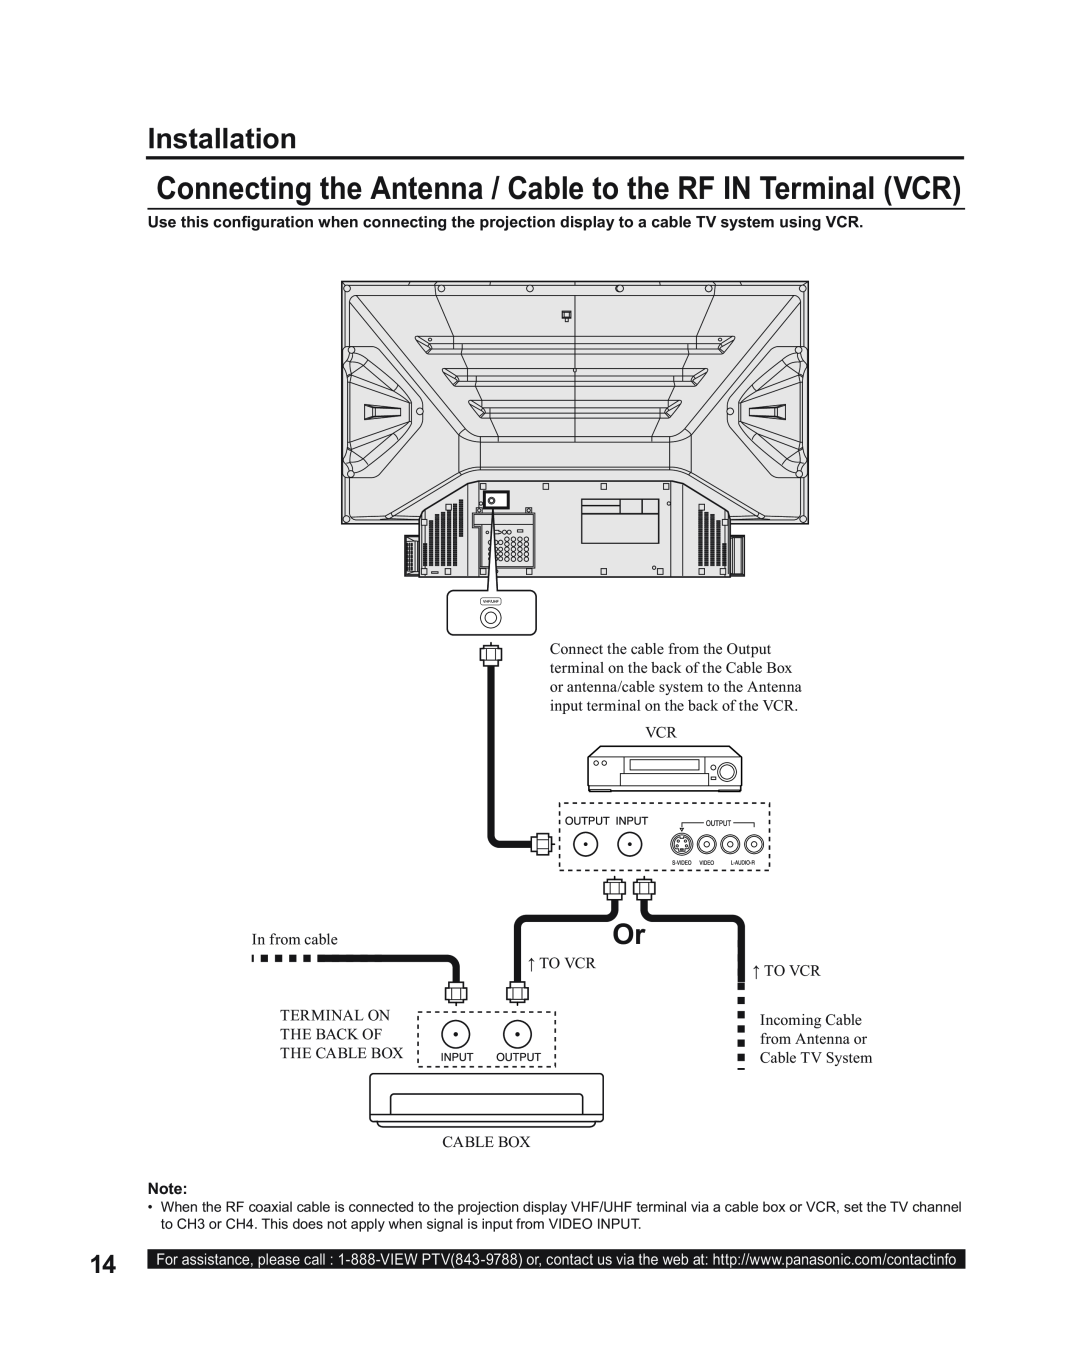 Panasonic PT-60LC14, PT-43LC14, PT-50LC14 manual Connecting the Antenna / Cable to the RF IN Terminal VCR, Installation 